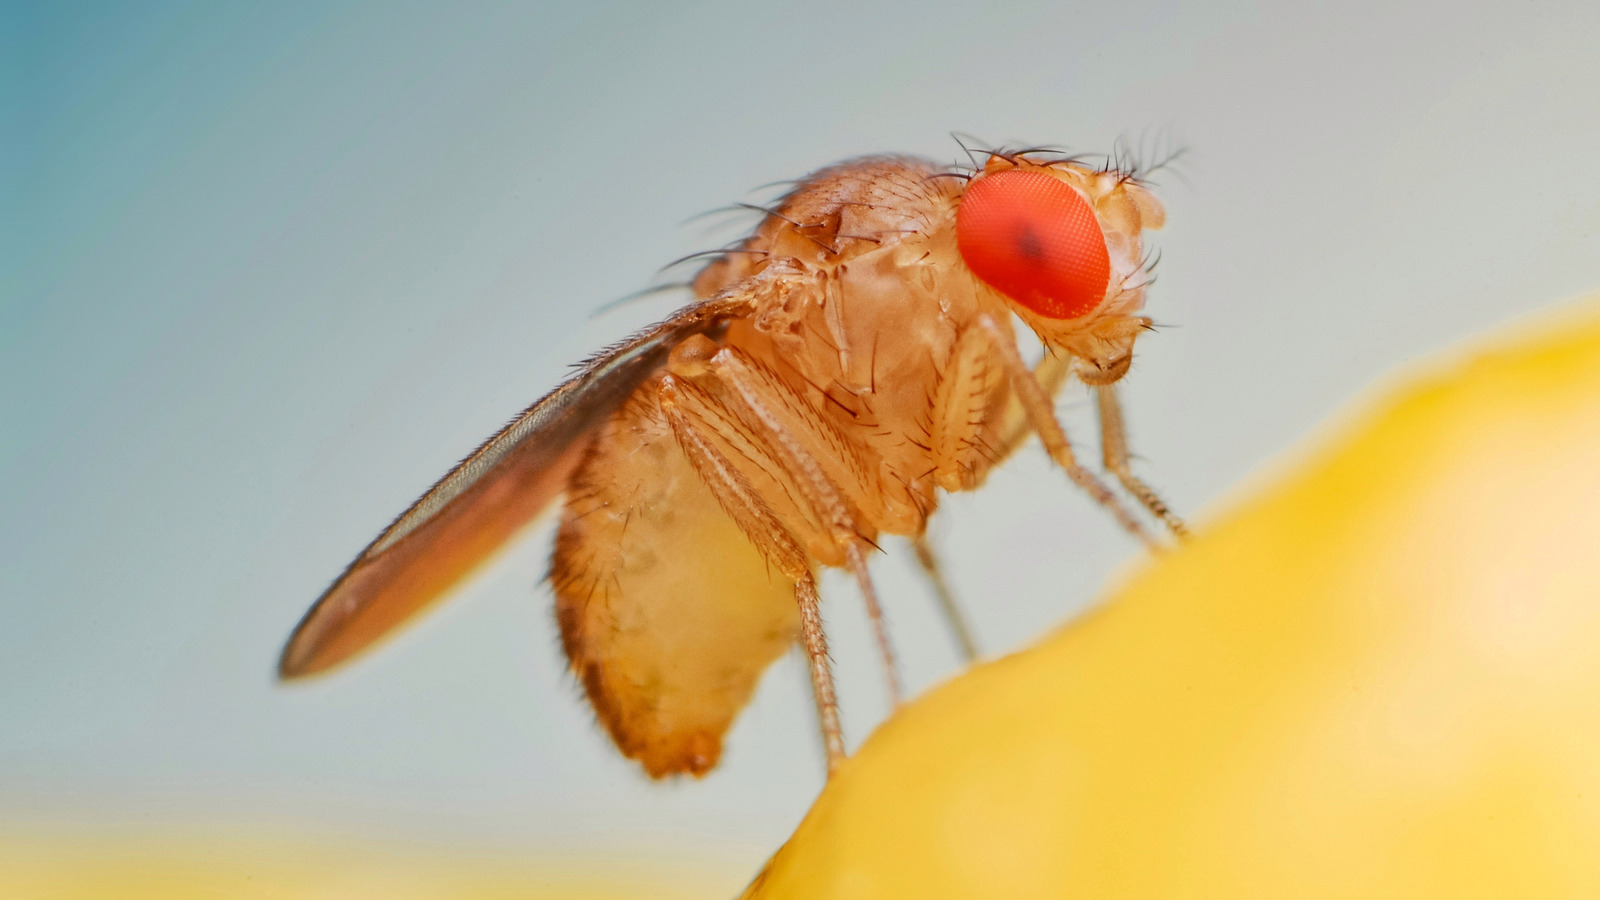 https://www.housedigest.com/img/gallery/how-to-get-rid-of-fruit-flies-once-and-for-all/l-intro-1663007005.jpg